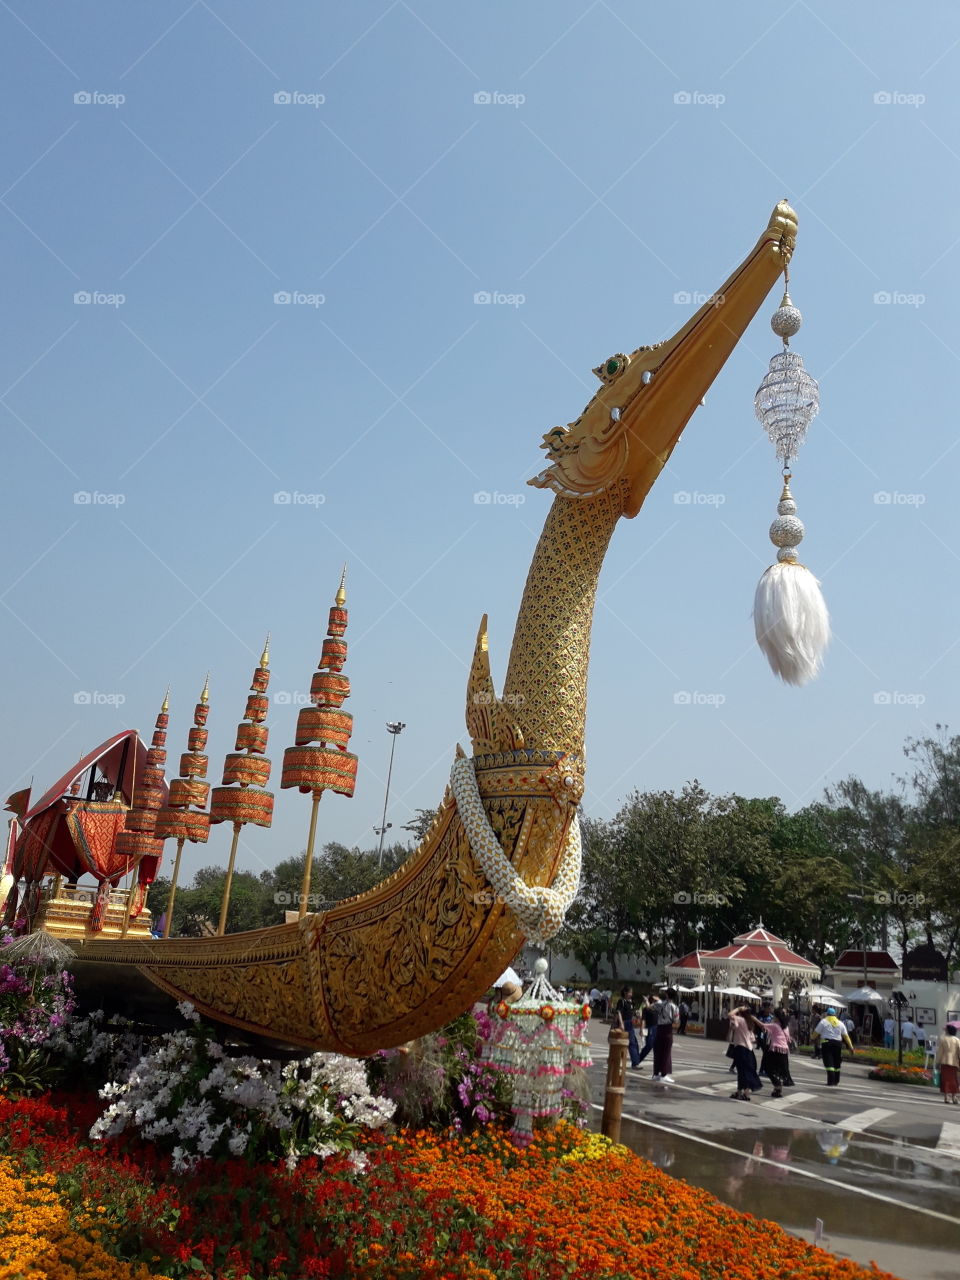 thai architecture " Royal Barge Suphannhong Model"  simulated from the real " Royal Barge Suphannahong" which used for king's ceremony , was manned by 50 oarsmen with 2 steersmen, two officers fore and aft , one standard bearer, one signal man,